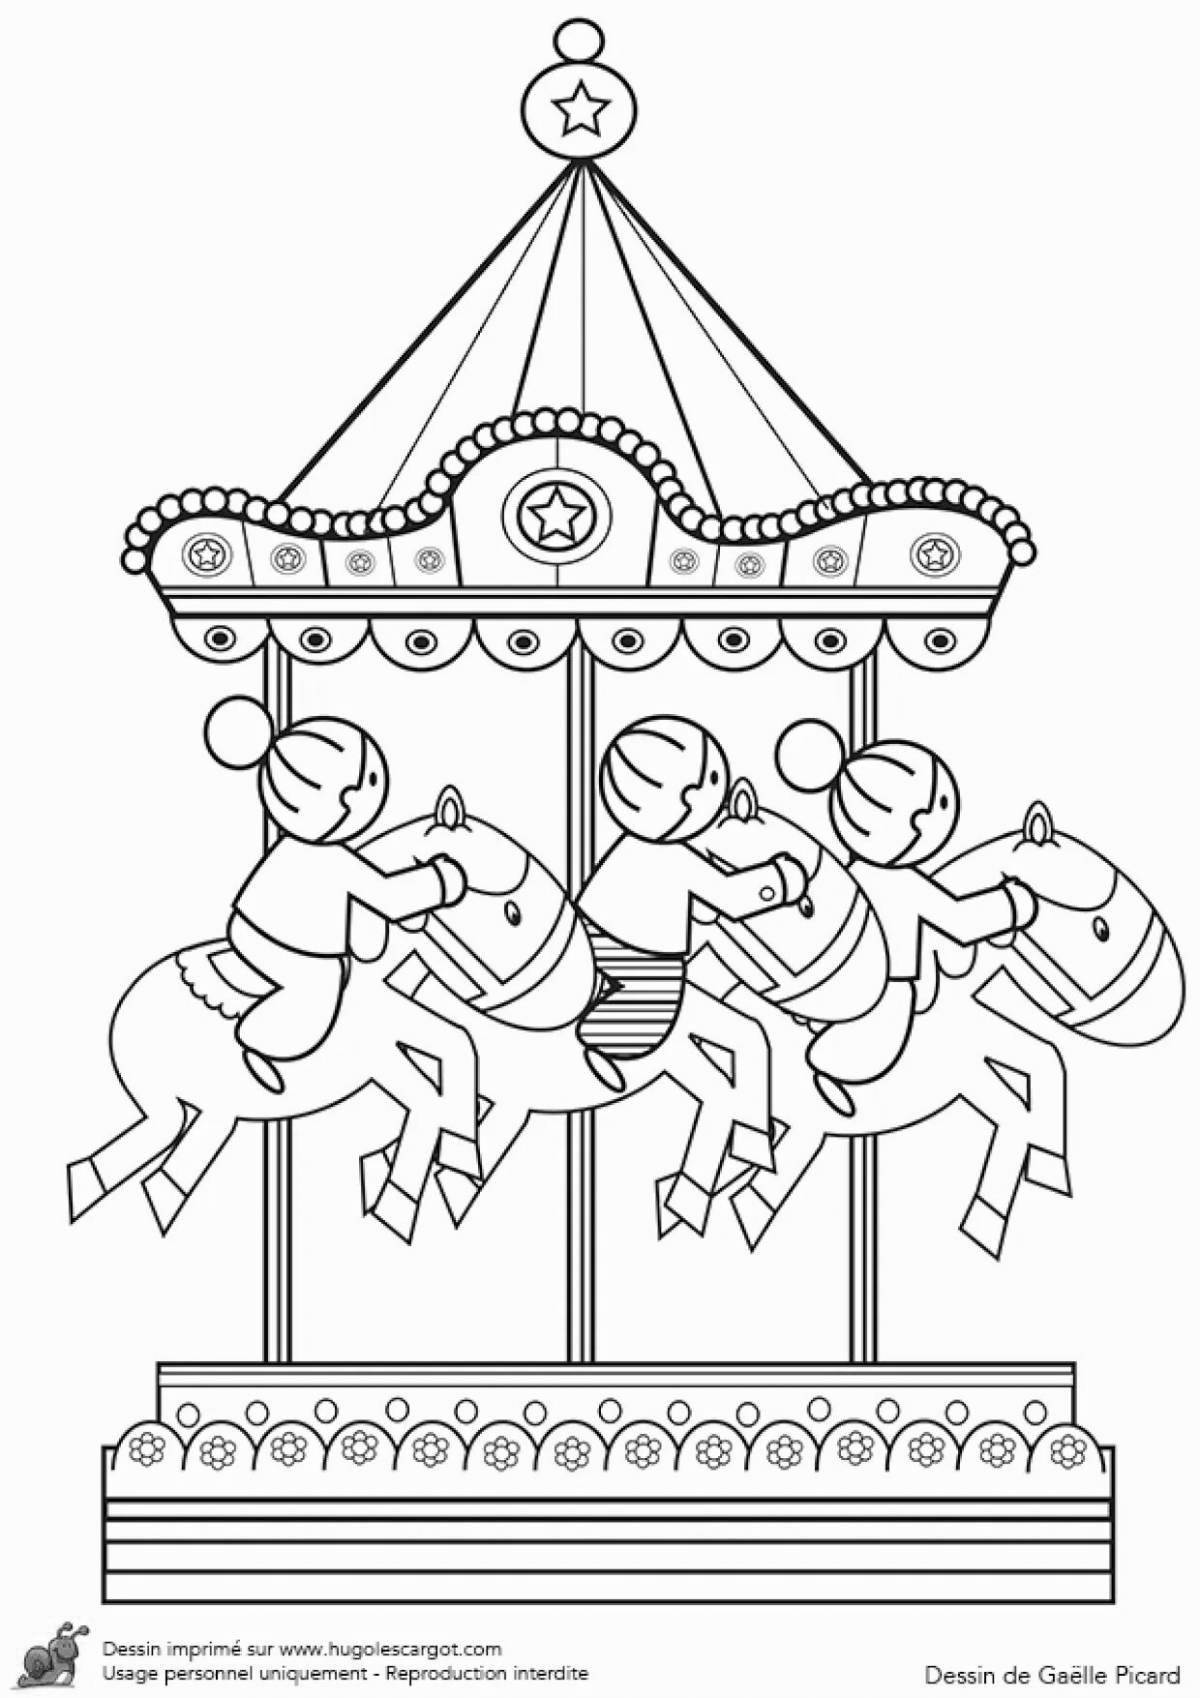 Animated baby carousel coloring book